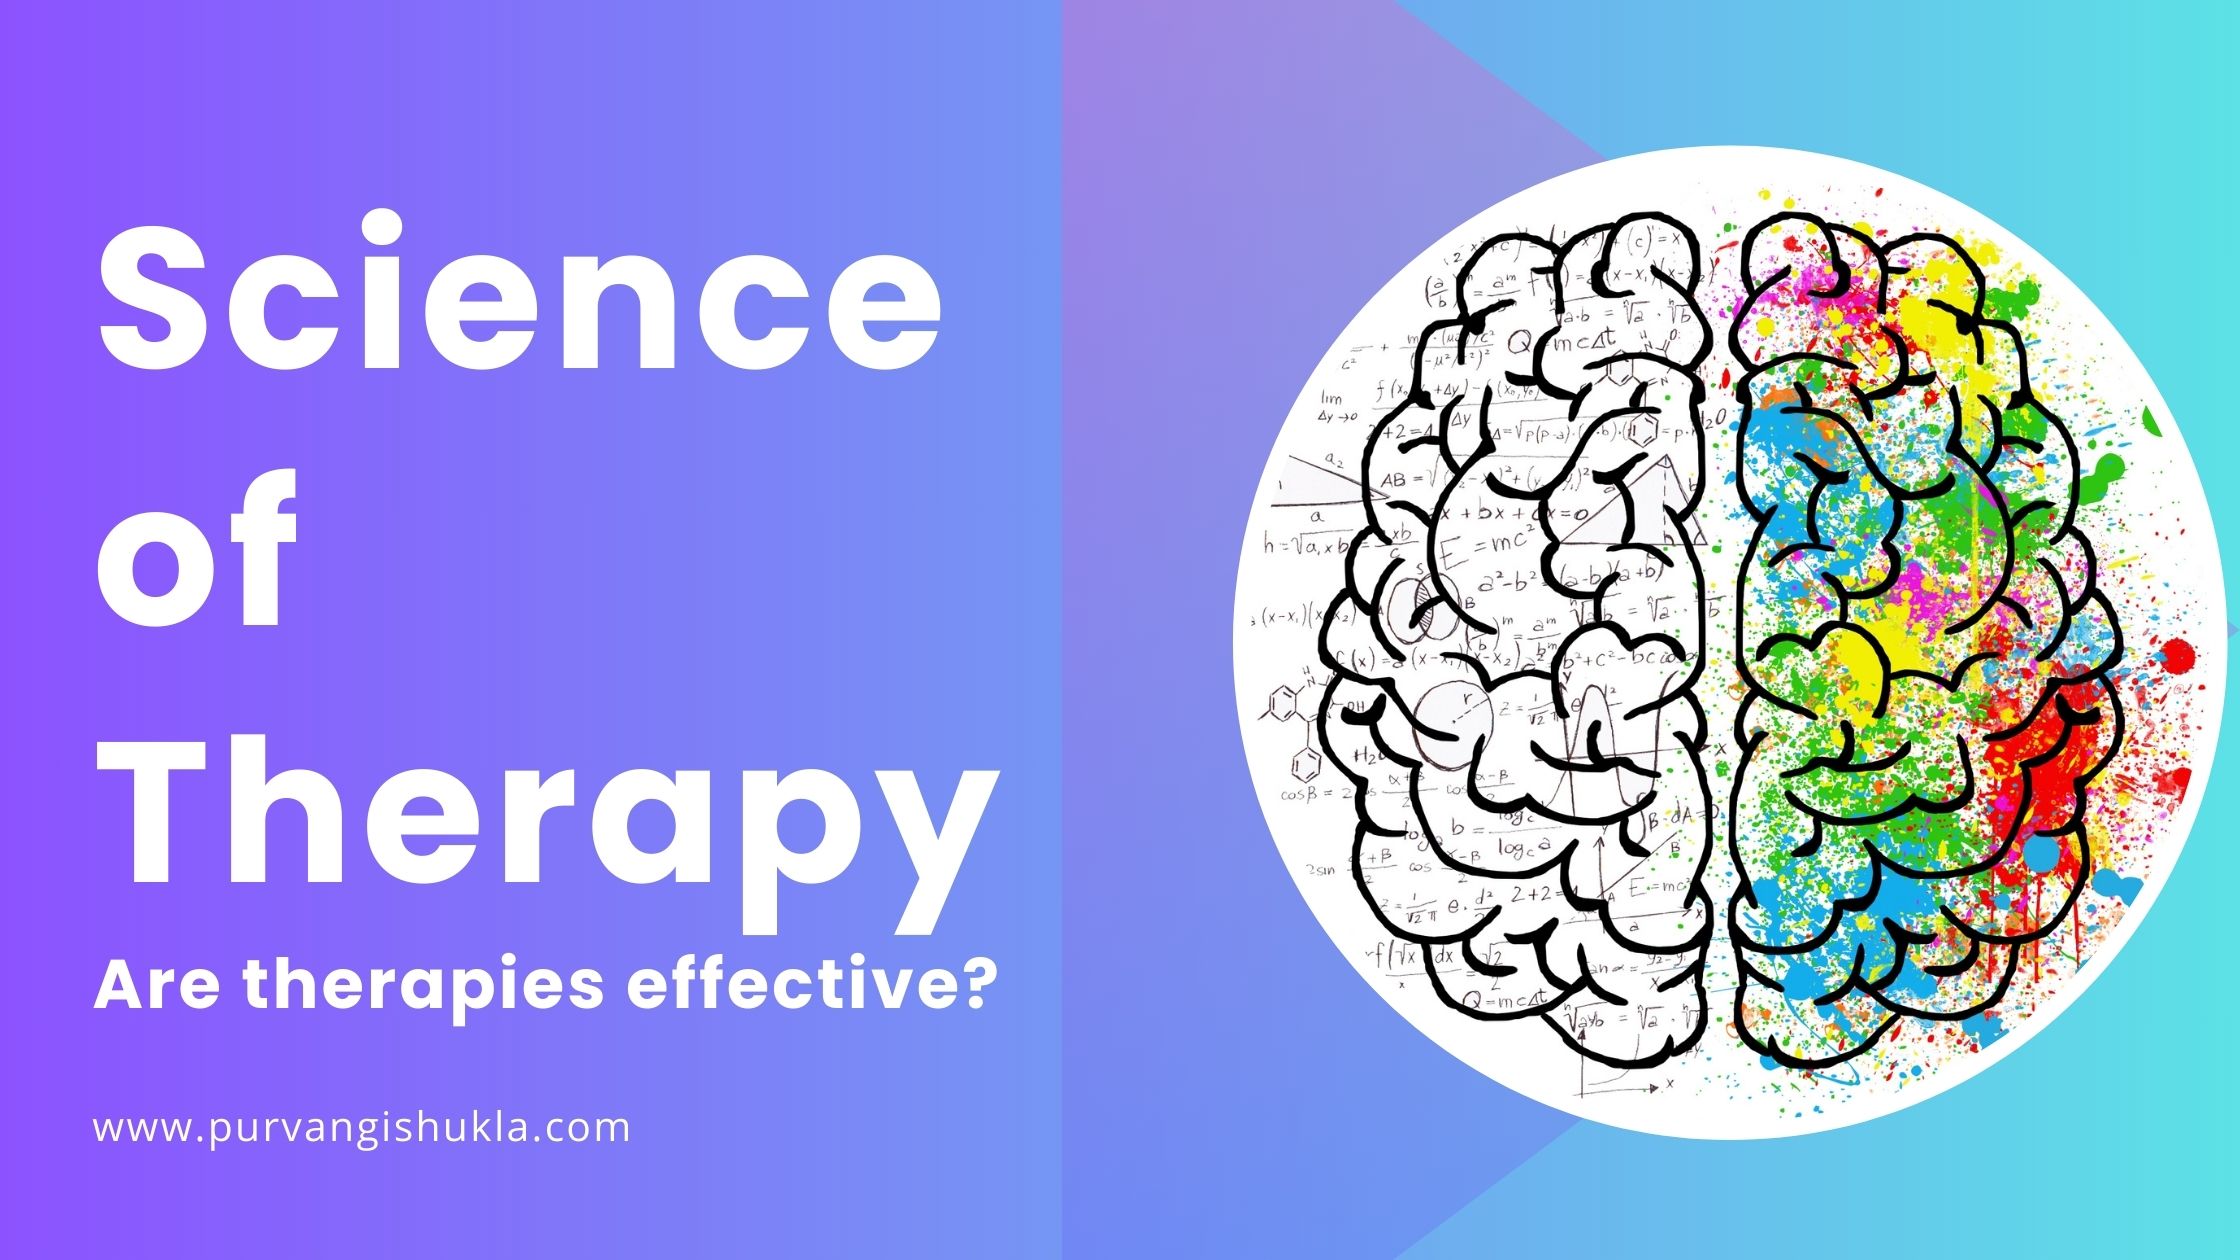 Science of Therapy - Are therapies effective